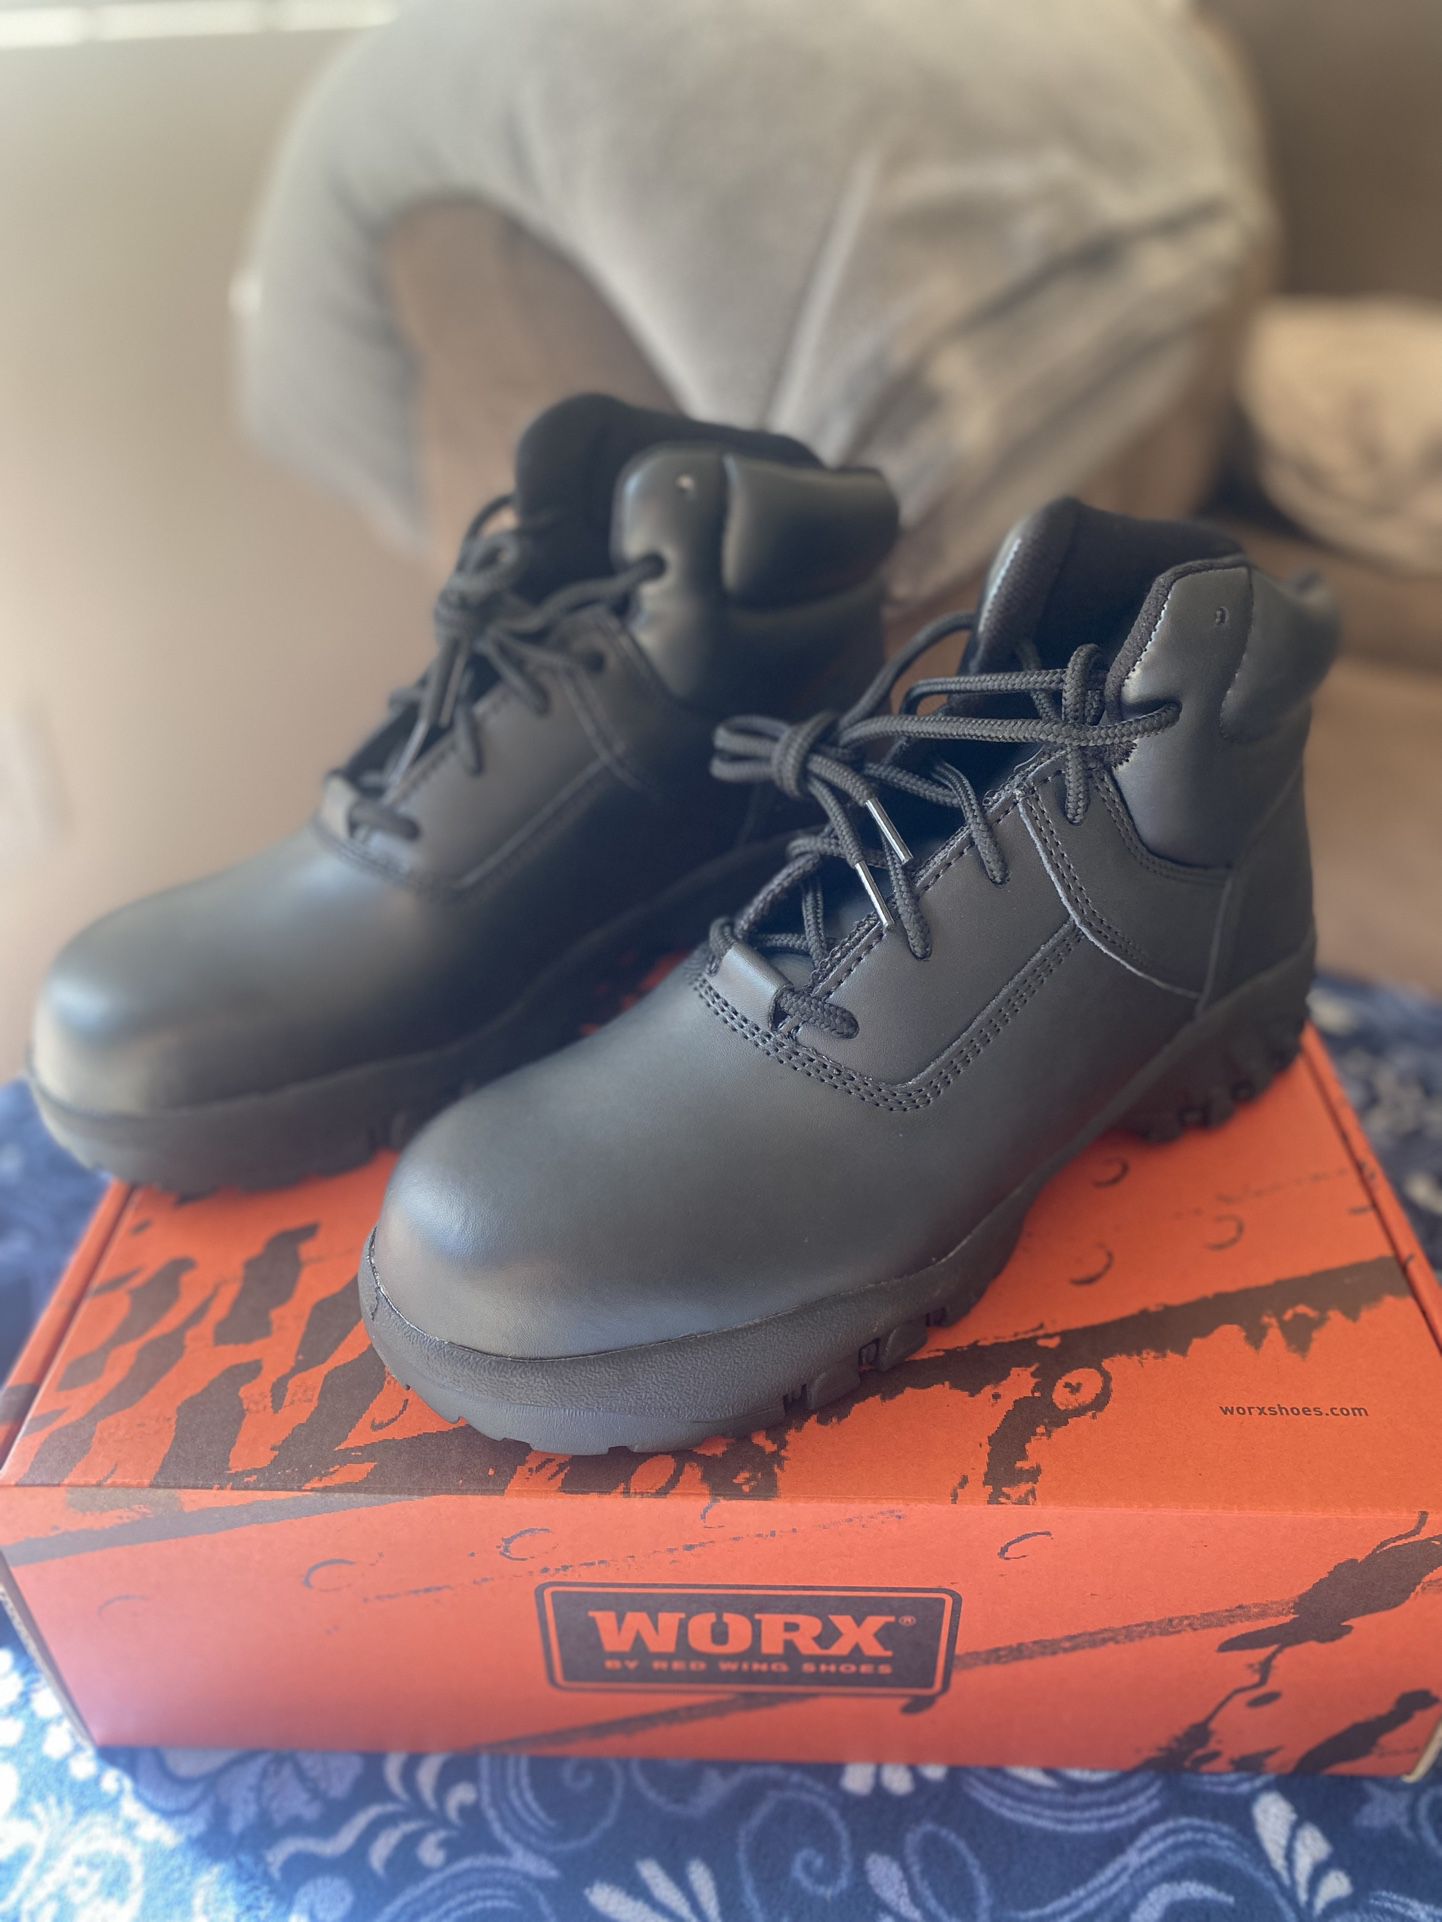 Brand New Red Wing Steel Toe Work Boots, Size Men’s 12